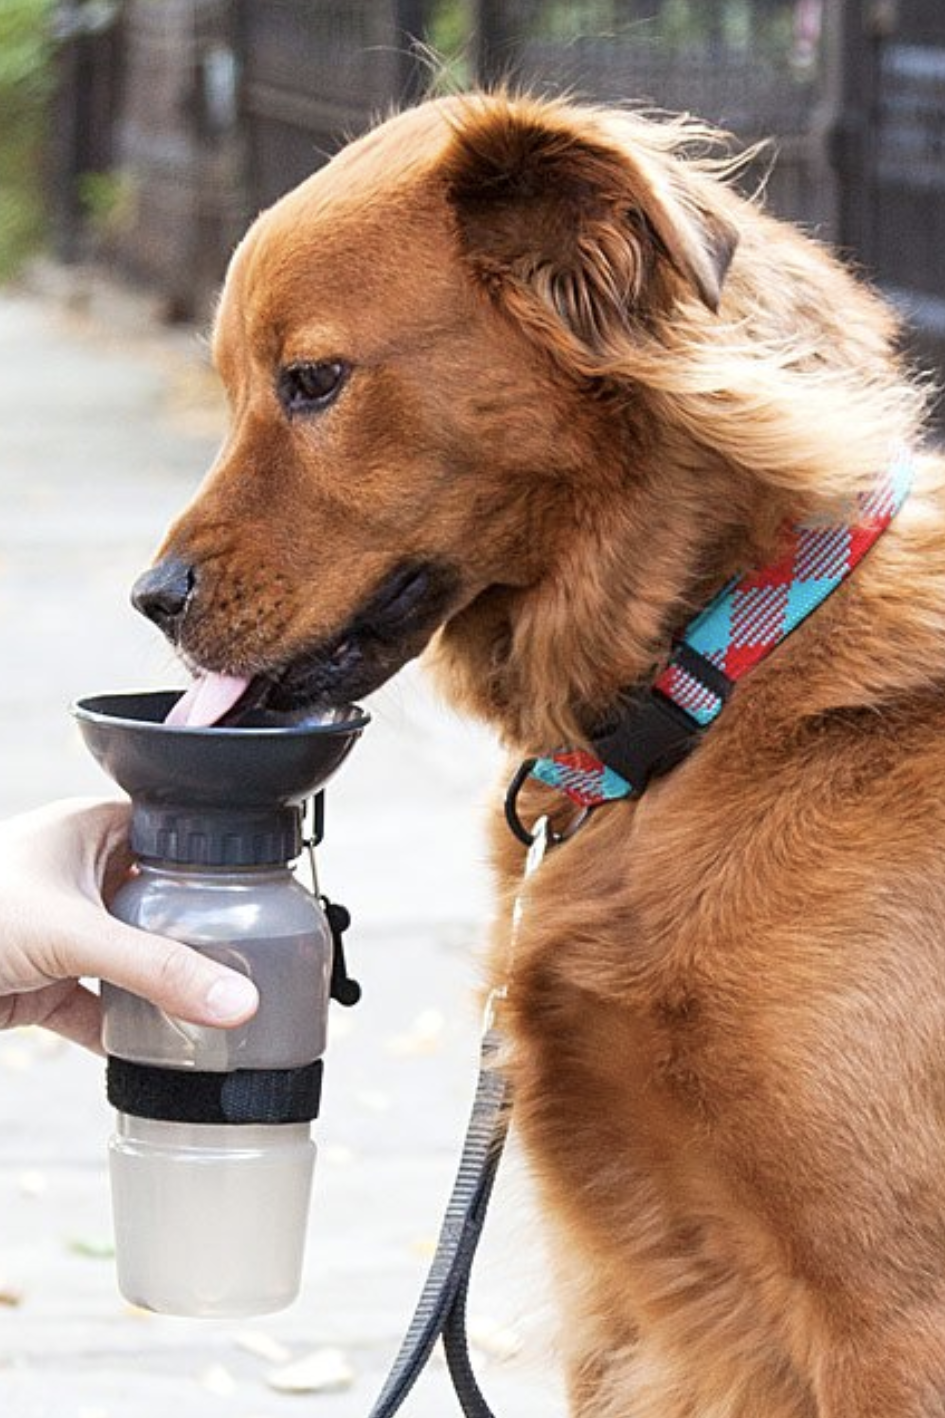 Use This Dog Bowl Water Bottle for Hikes